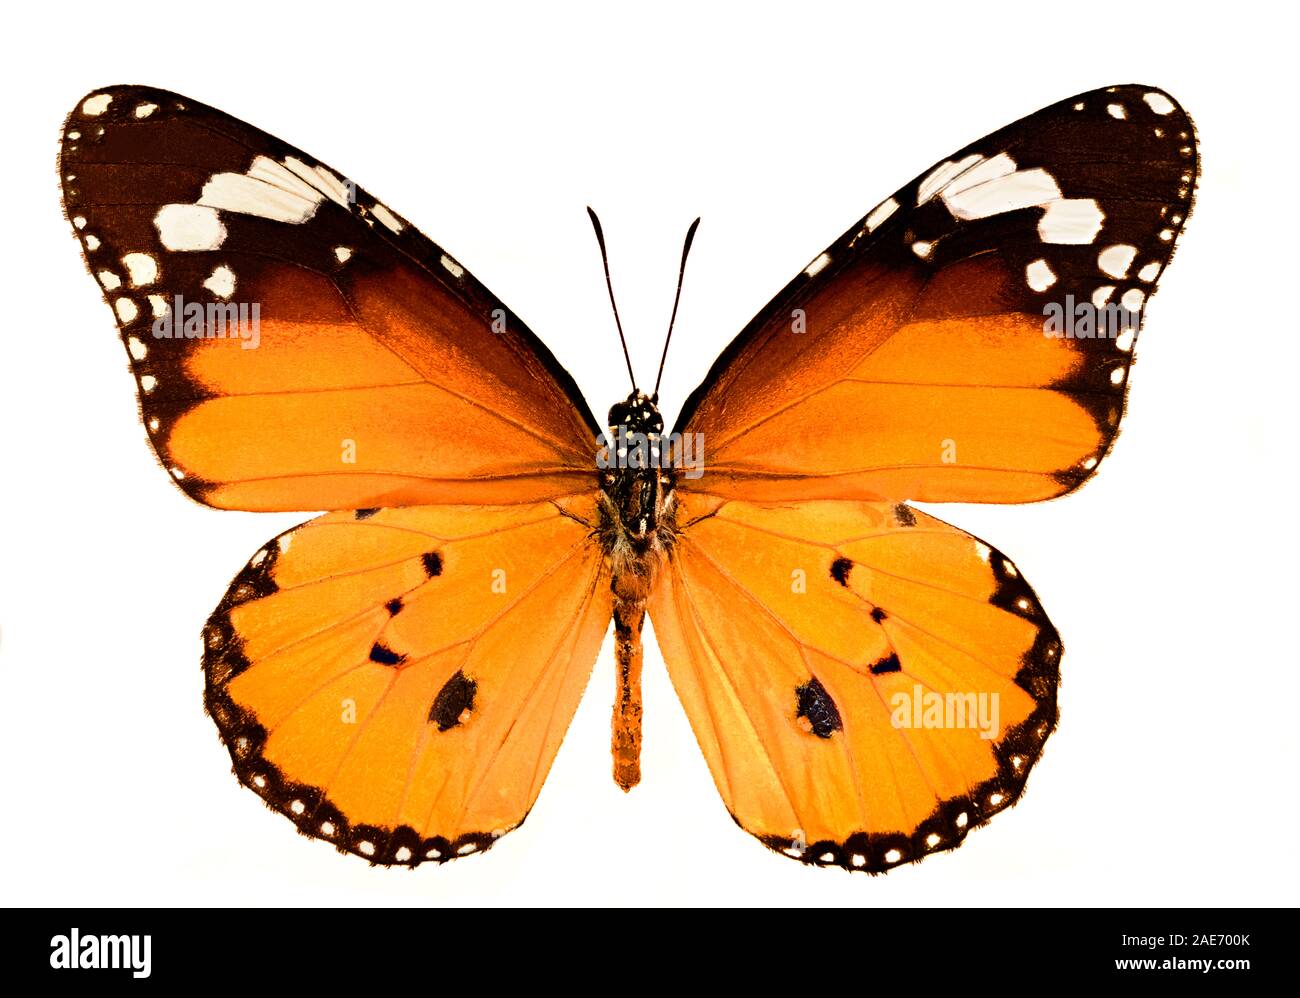 cut out image of the plain tiger butterfly, or African queen butterfly or African monarch butterfly Danaus Chrysippus Stock Photo